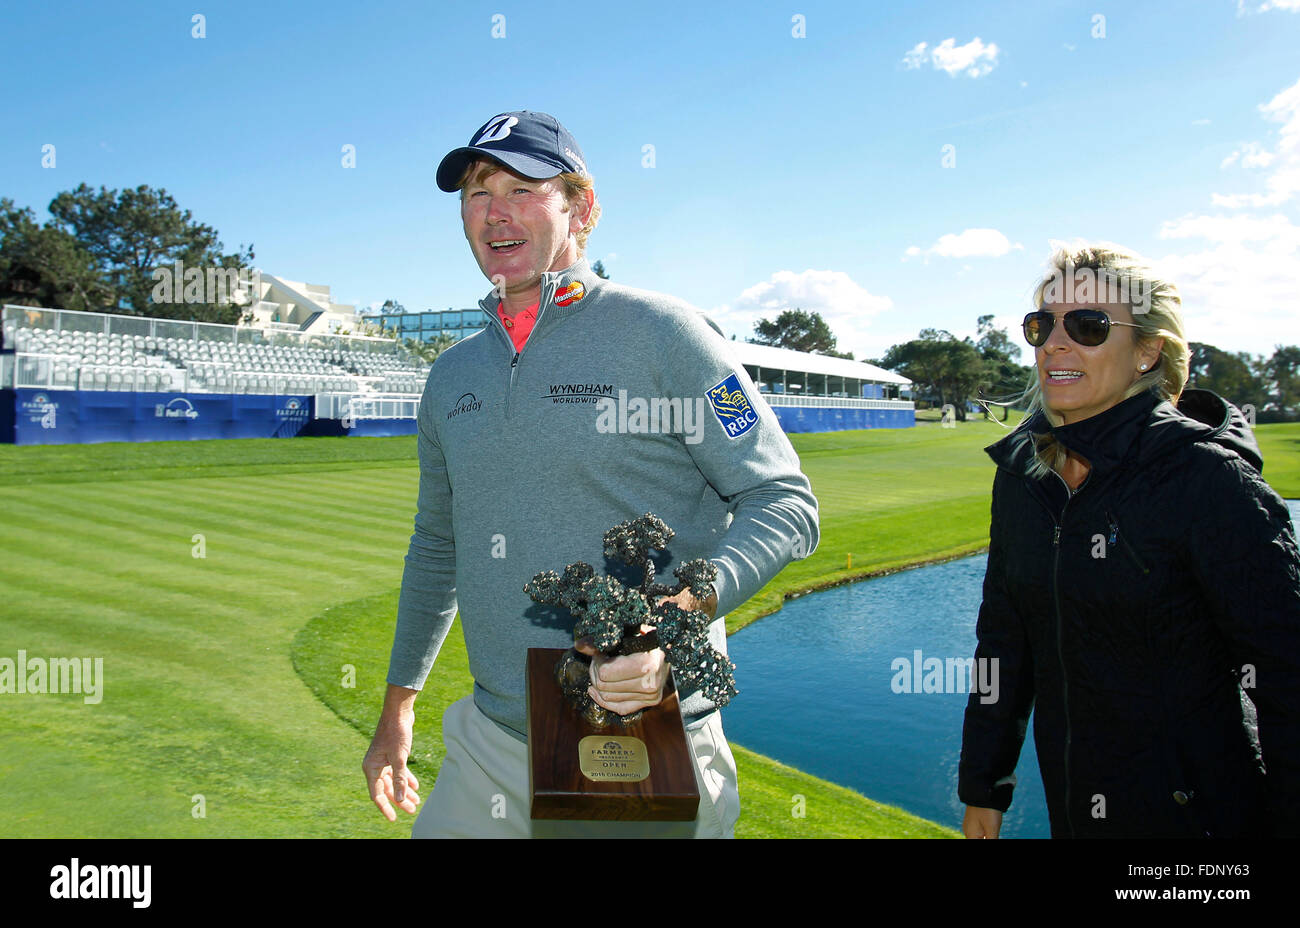 San Diego, CA, USA. 1st Feb, 2016. SAN DIEGO, CA -FEB 1, 2015 - | Brandt Snedeker, who didn't play on Monday, won the Farmers Insurance Open. Snedeker finished before a weather delay on Sunday with a 6 under, shown here with his wife Mandy. Credit:  K.C. Alfred/U-T San Diego/ZUMA Wire/Alamy Live News Stock Photo